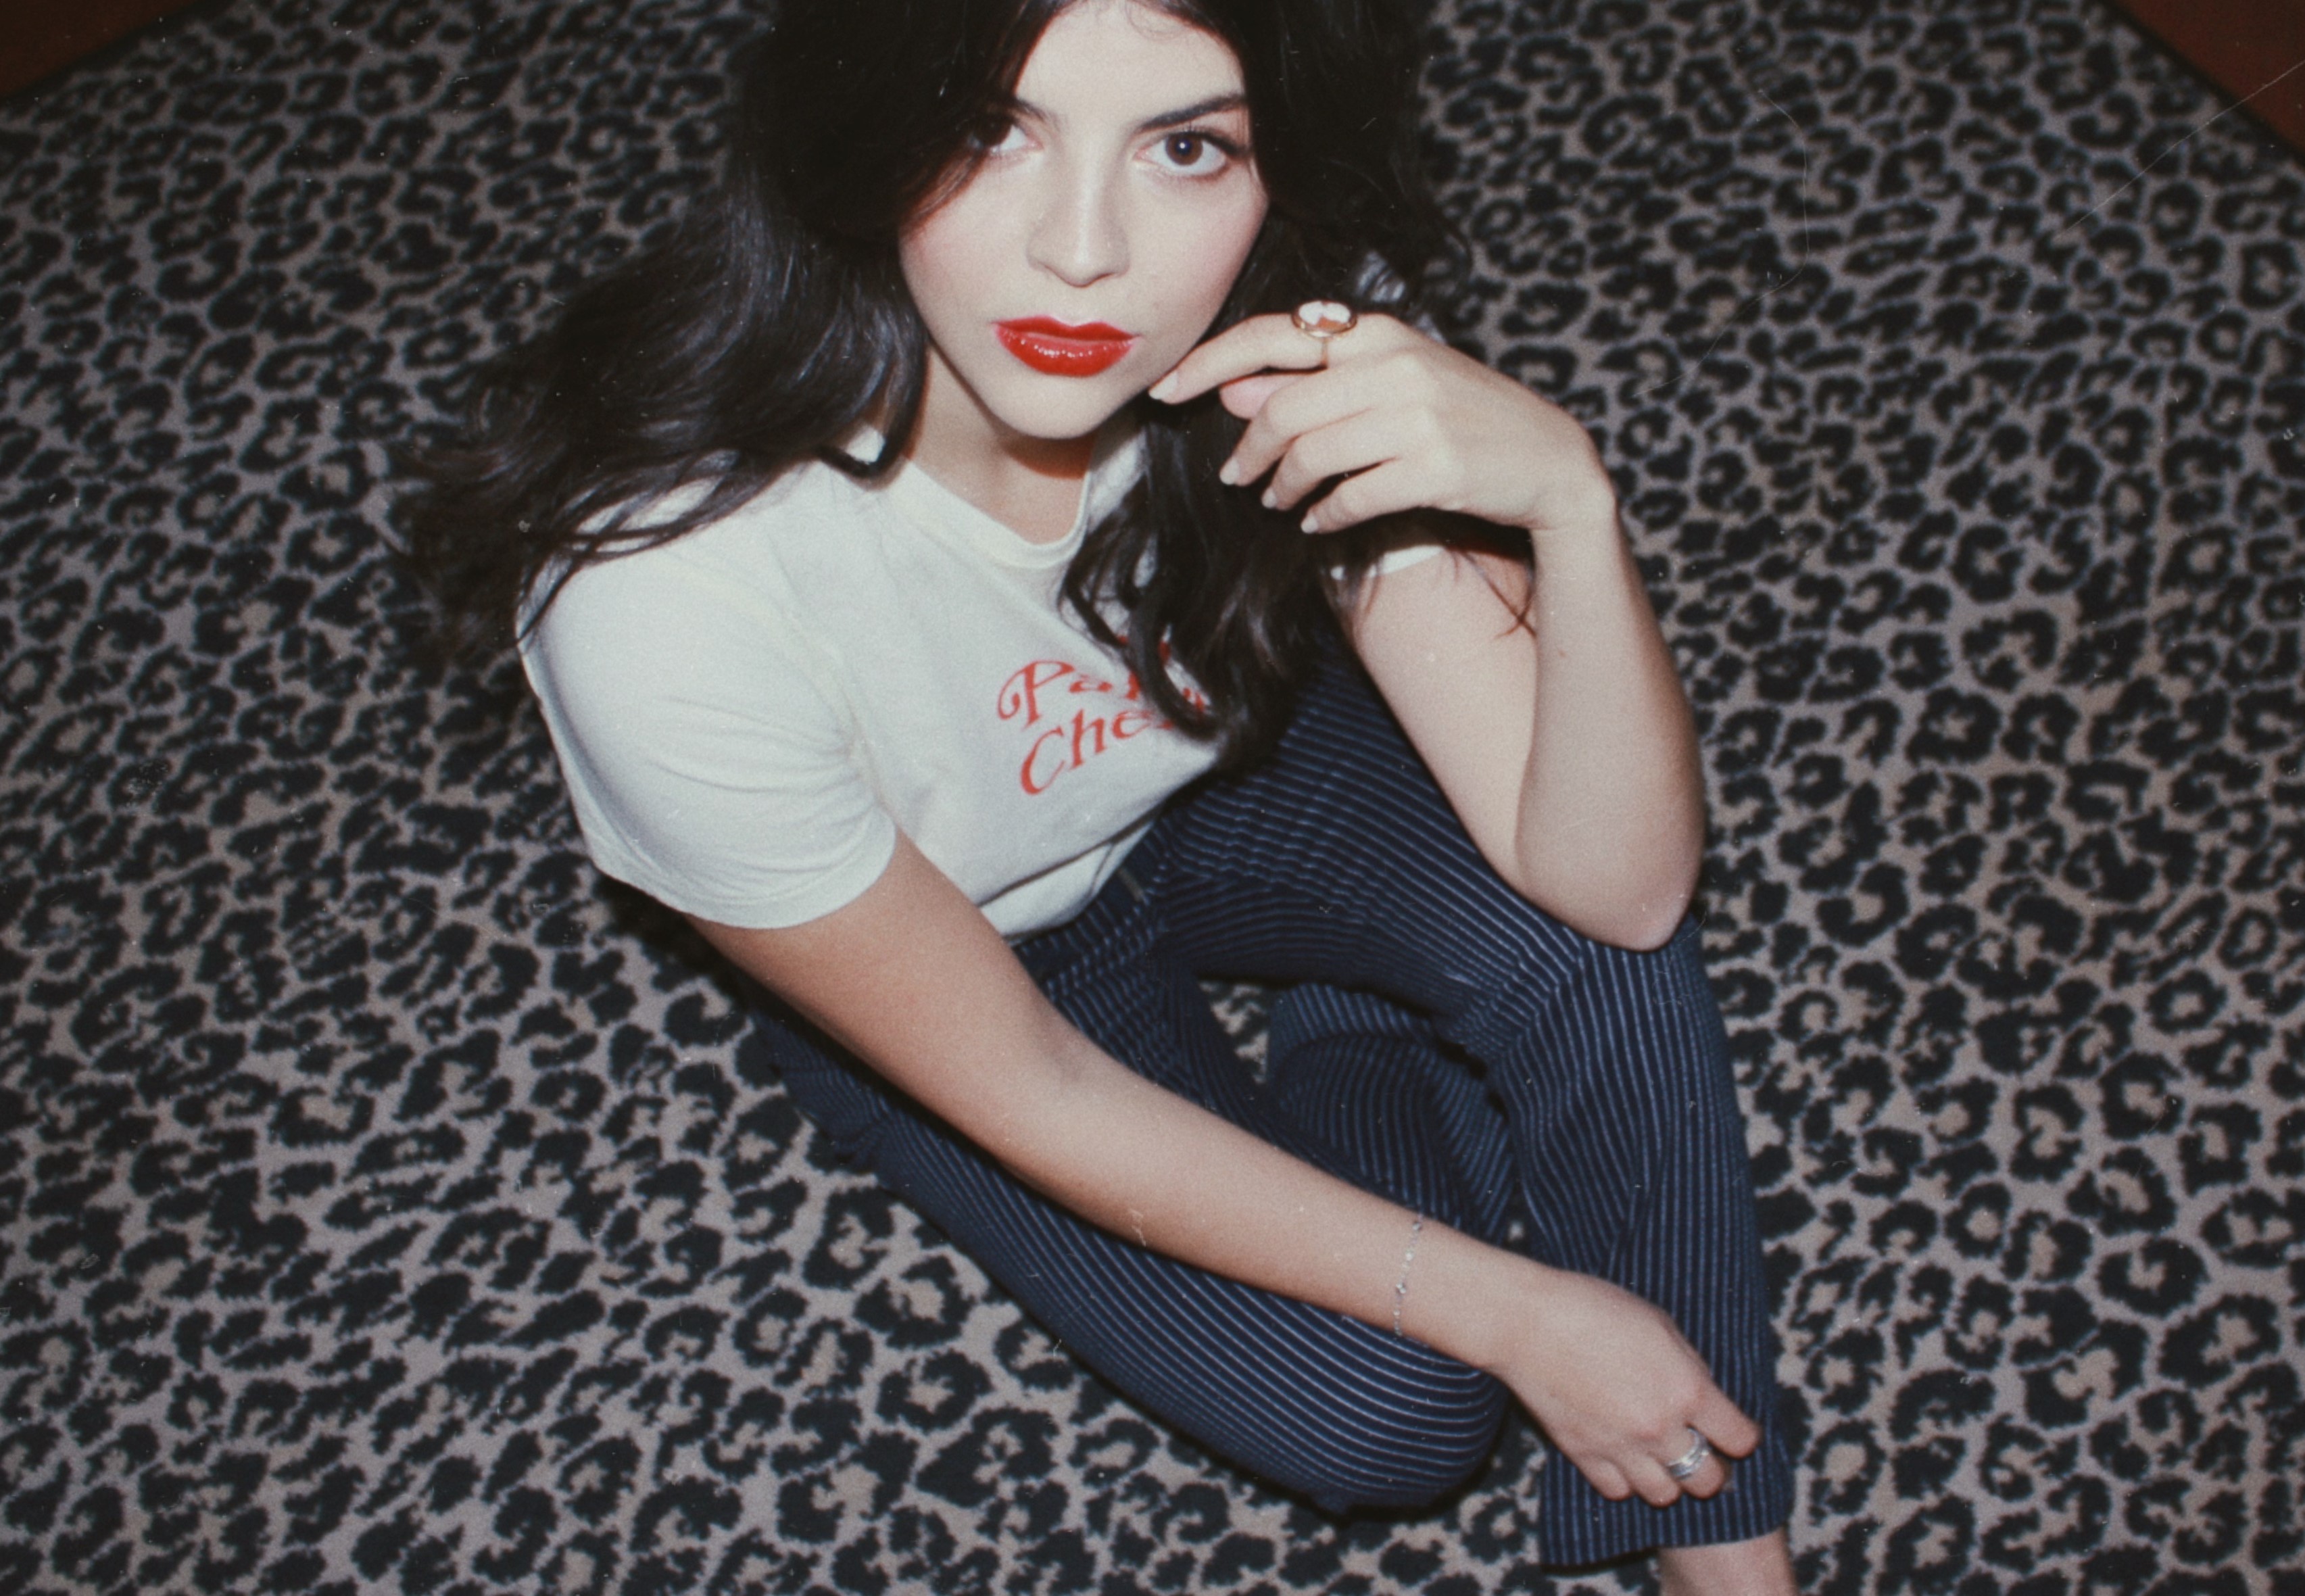 Song of the Day: “Loner,” by Nikki Yanofsky